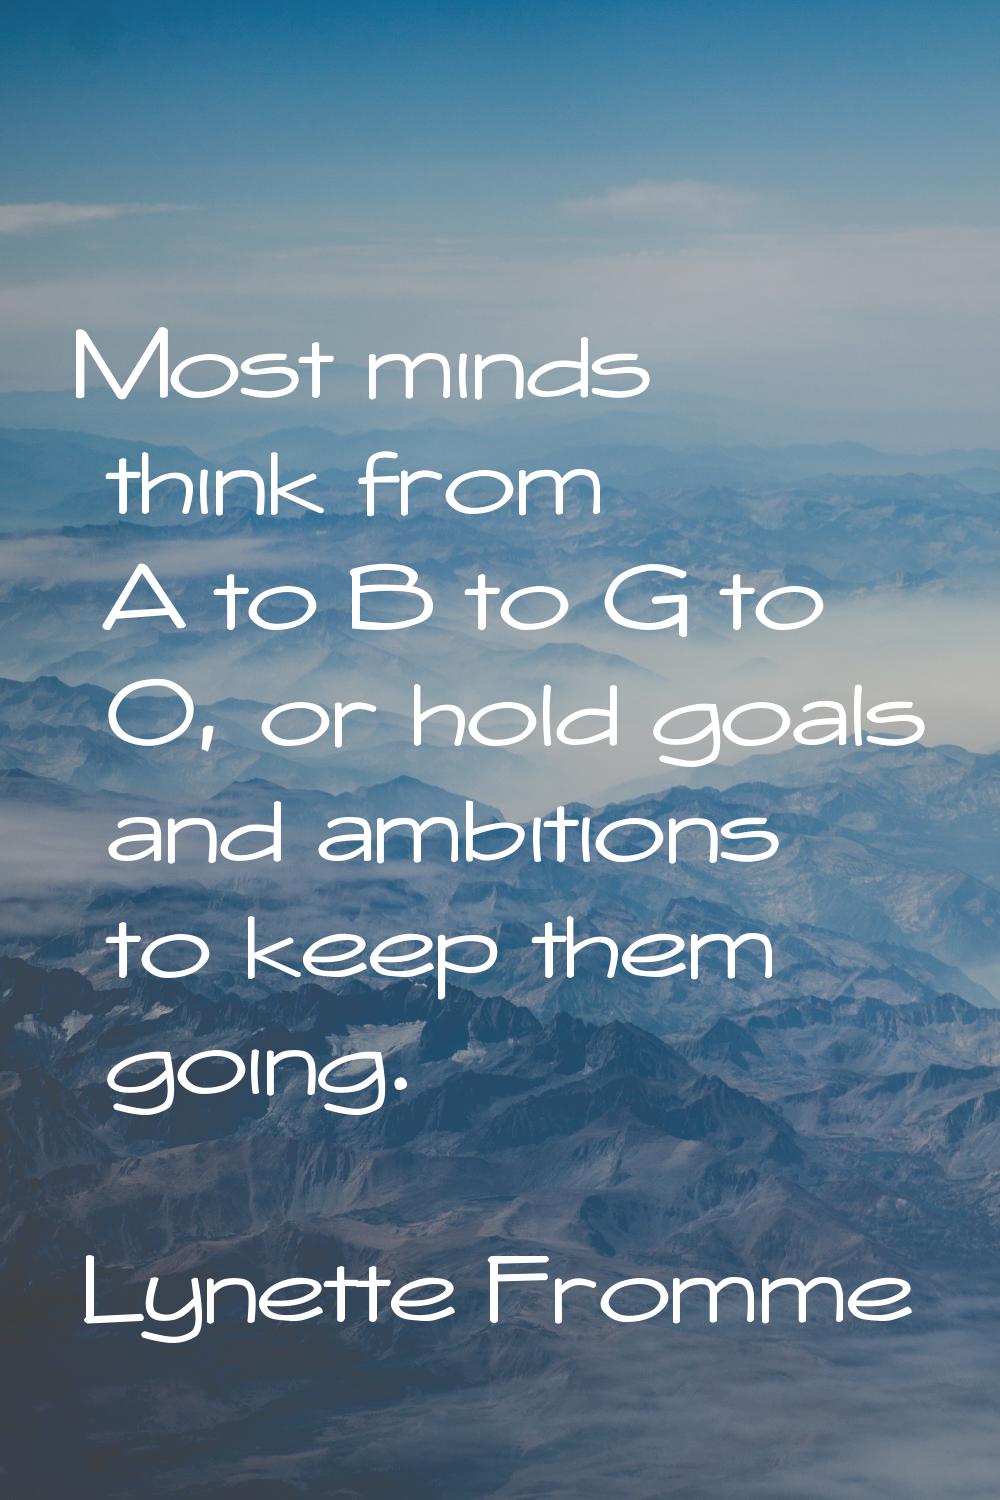 Most minds think from A to B to G to O, or hold goals and ambitions to keep them going.